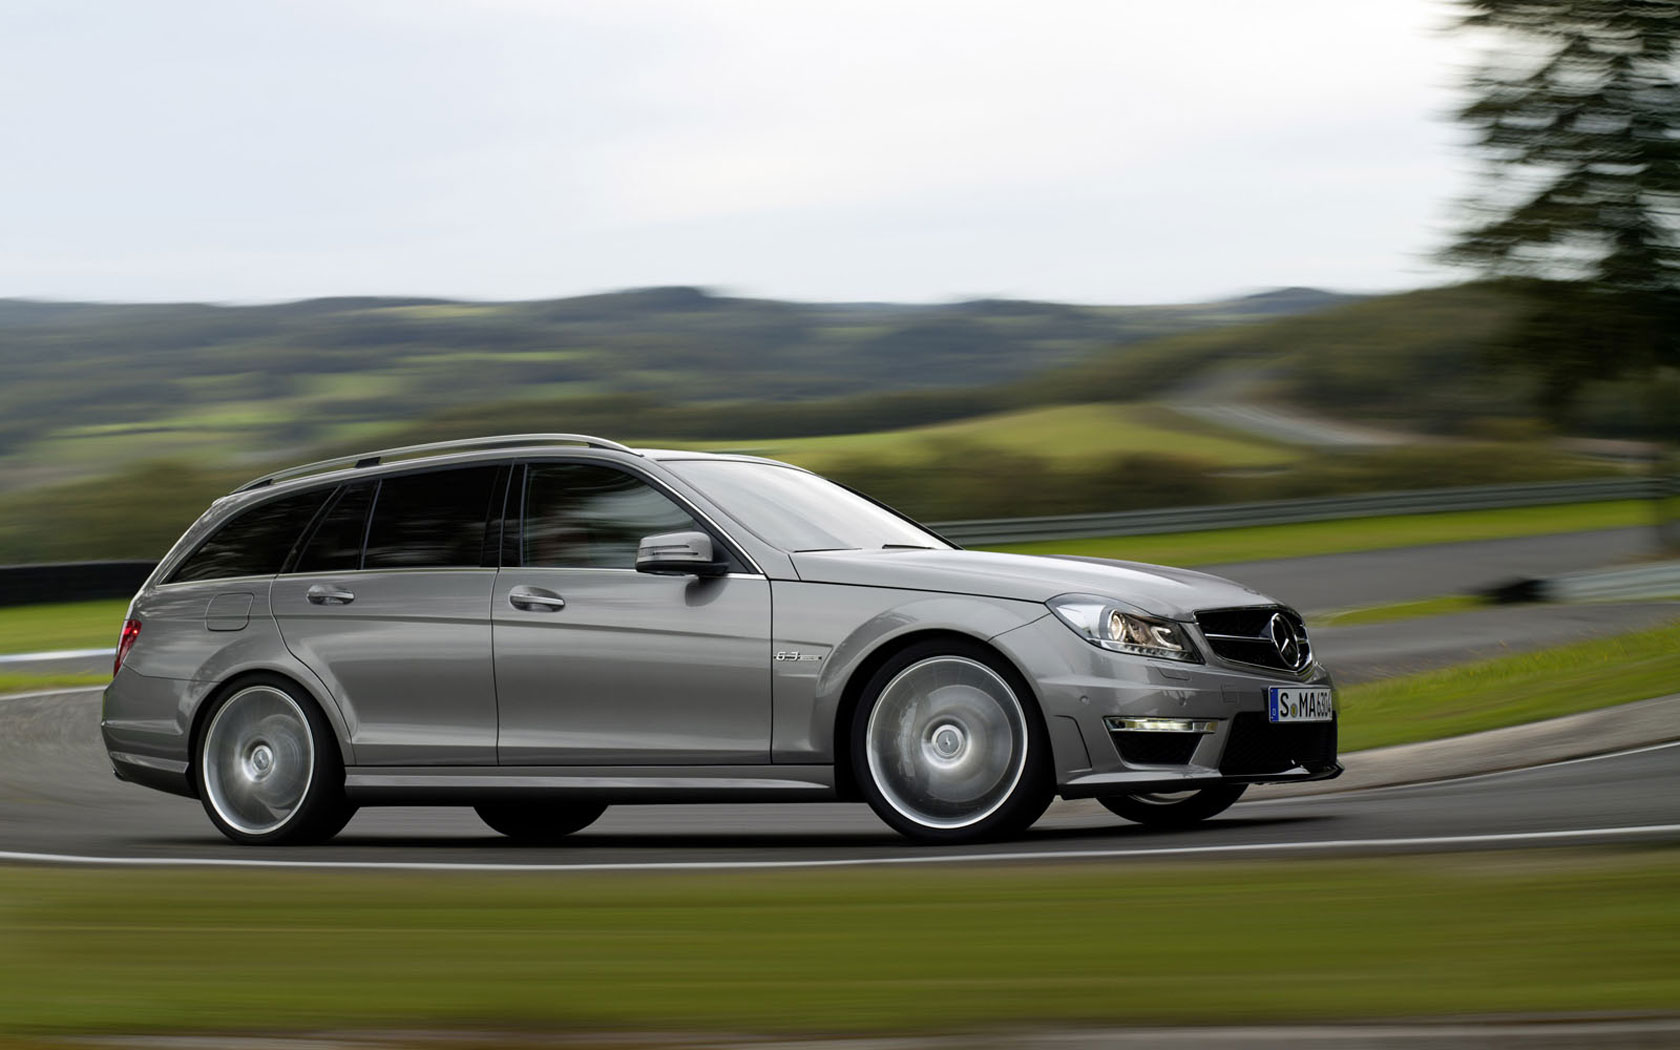  Mercedes C-Class AMG Touring (2011-2013)